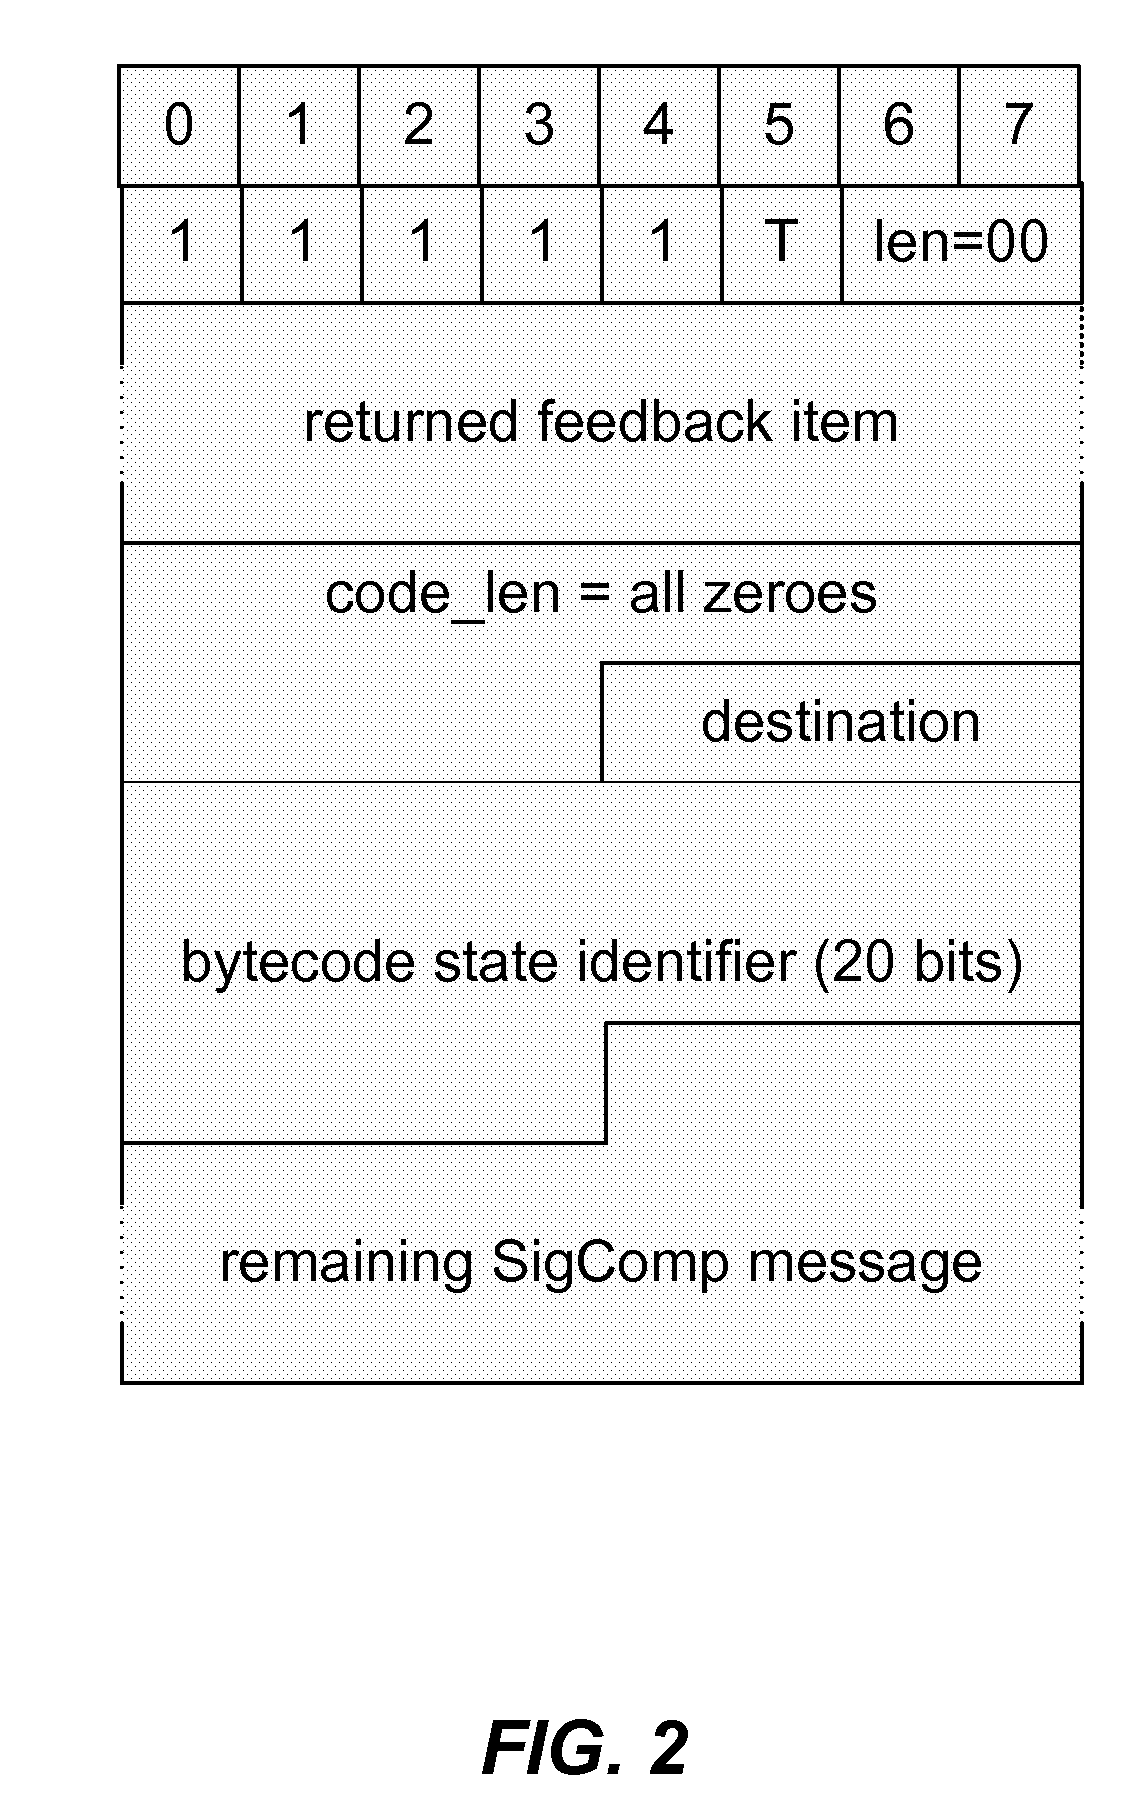 Optimizing static dictionary usage for signal, hypertext transfer protocol and bytecode compression in a wireless network